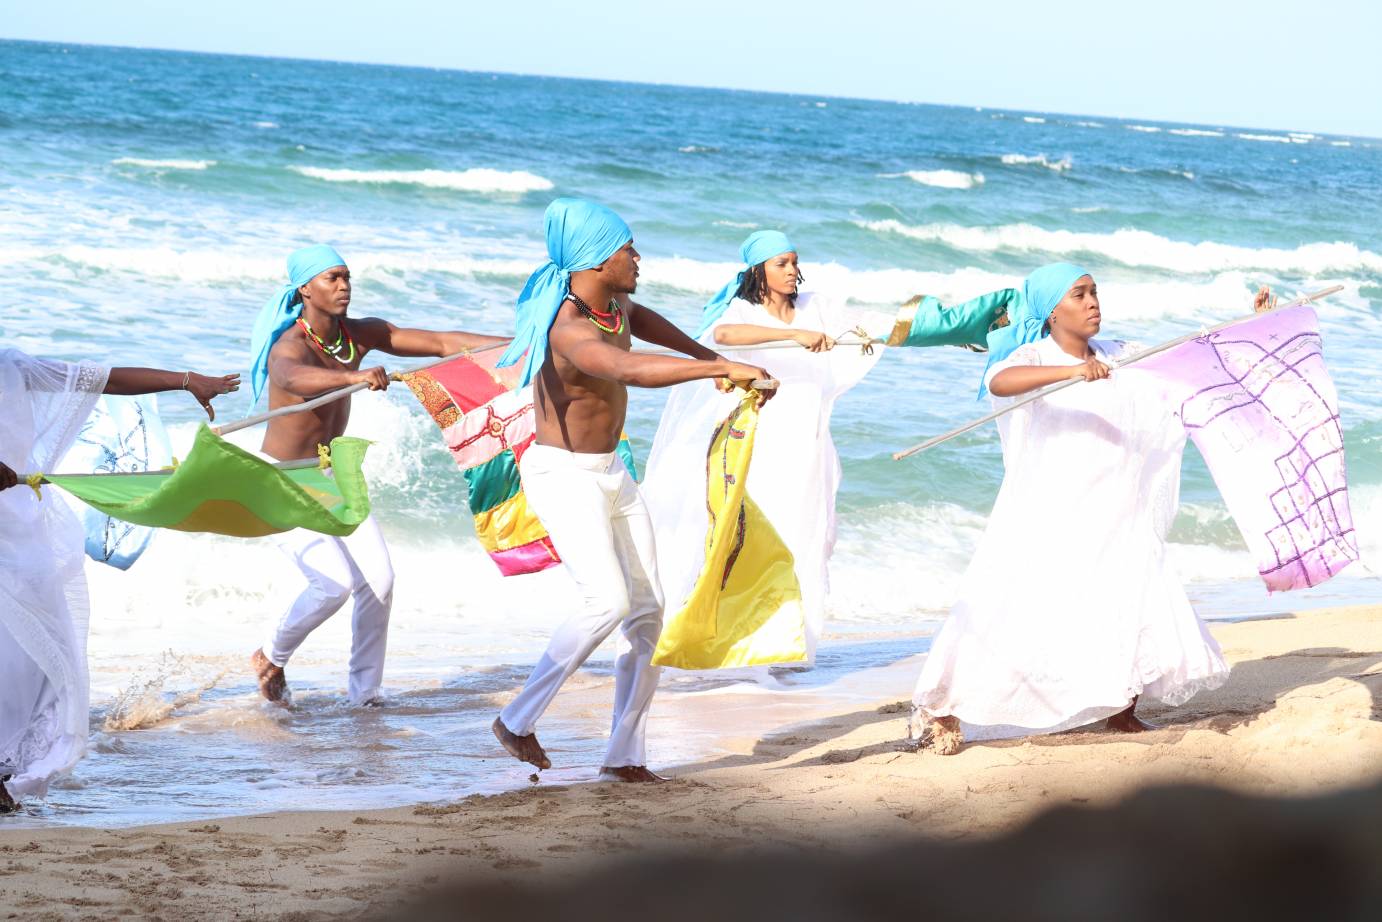 Against a turquoise ocean, men and women in white with aquamarine headscarves wave colorful flags